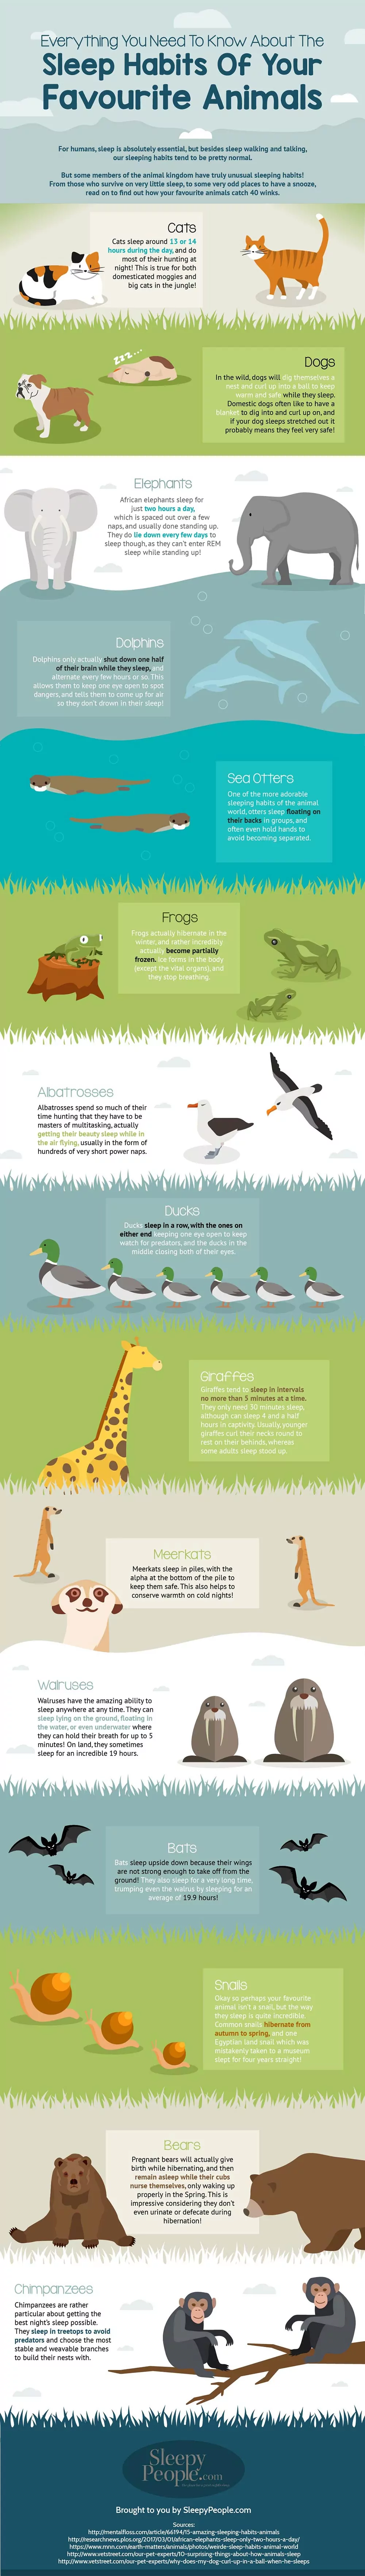 The Sleep Habits Of Your Favorite Animals Infographic